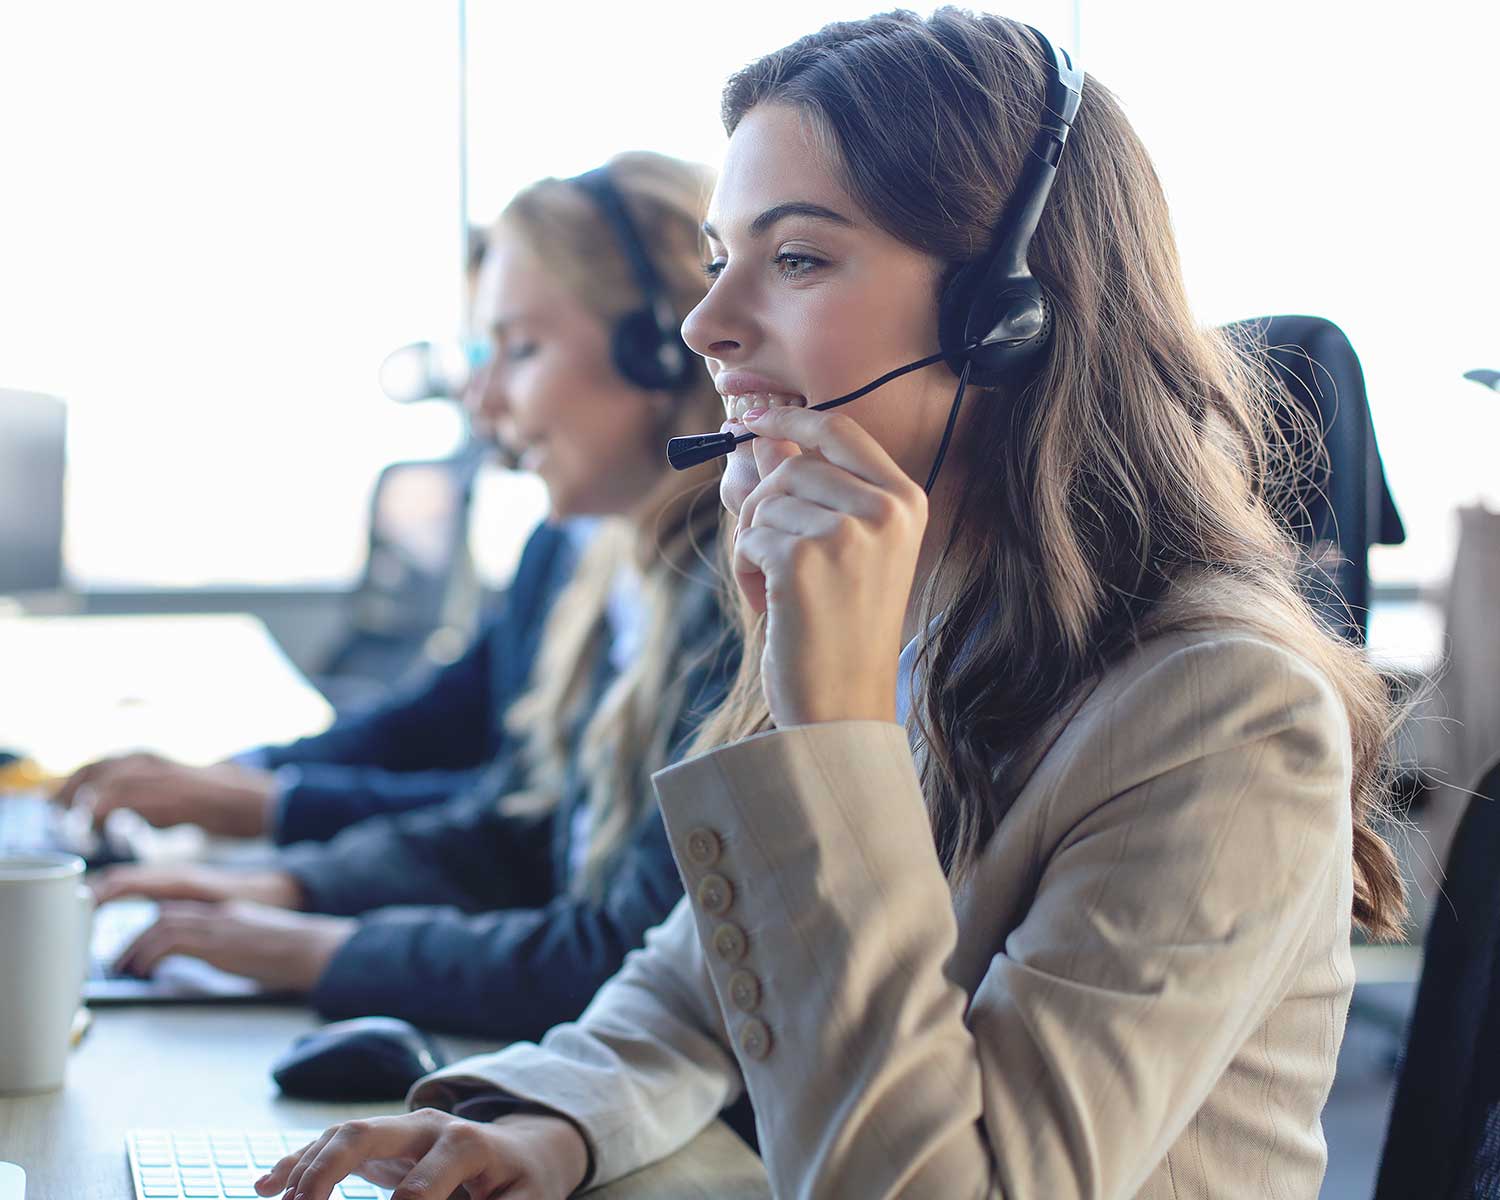 customer service reps taking phone calls | payment solutions